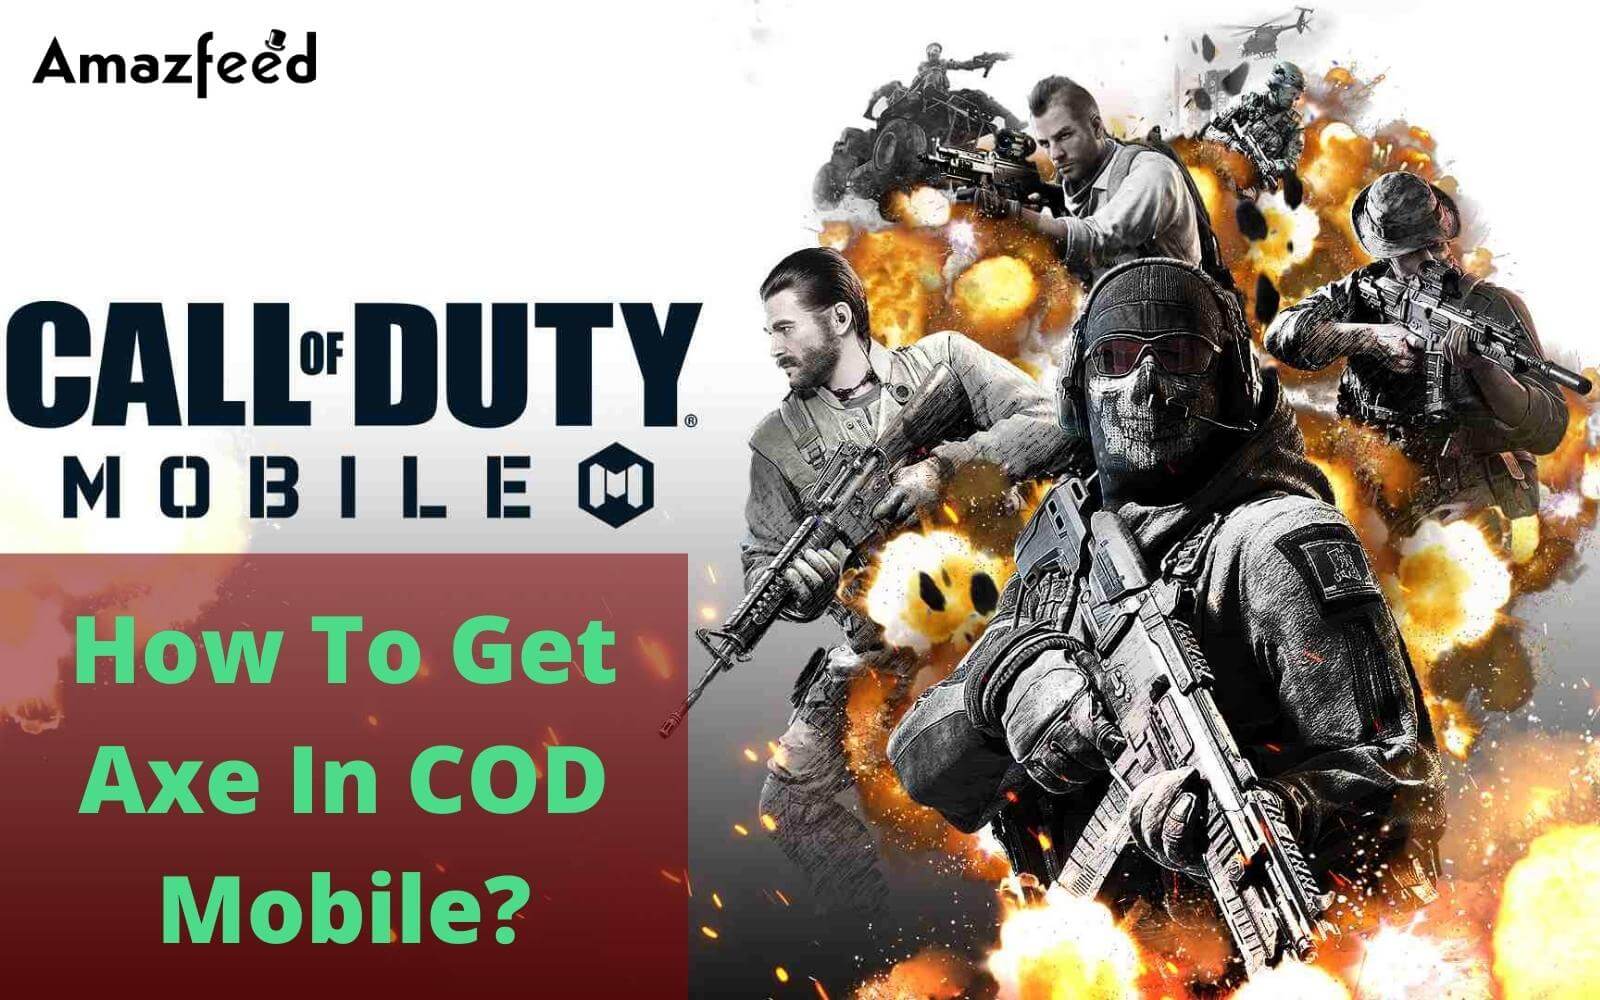 How To Get Axe In COD Mobile